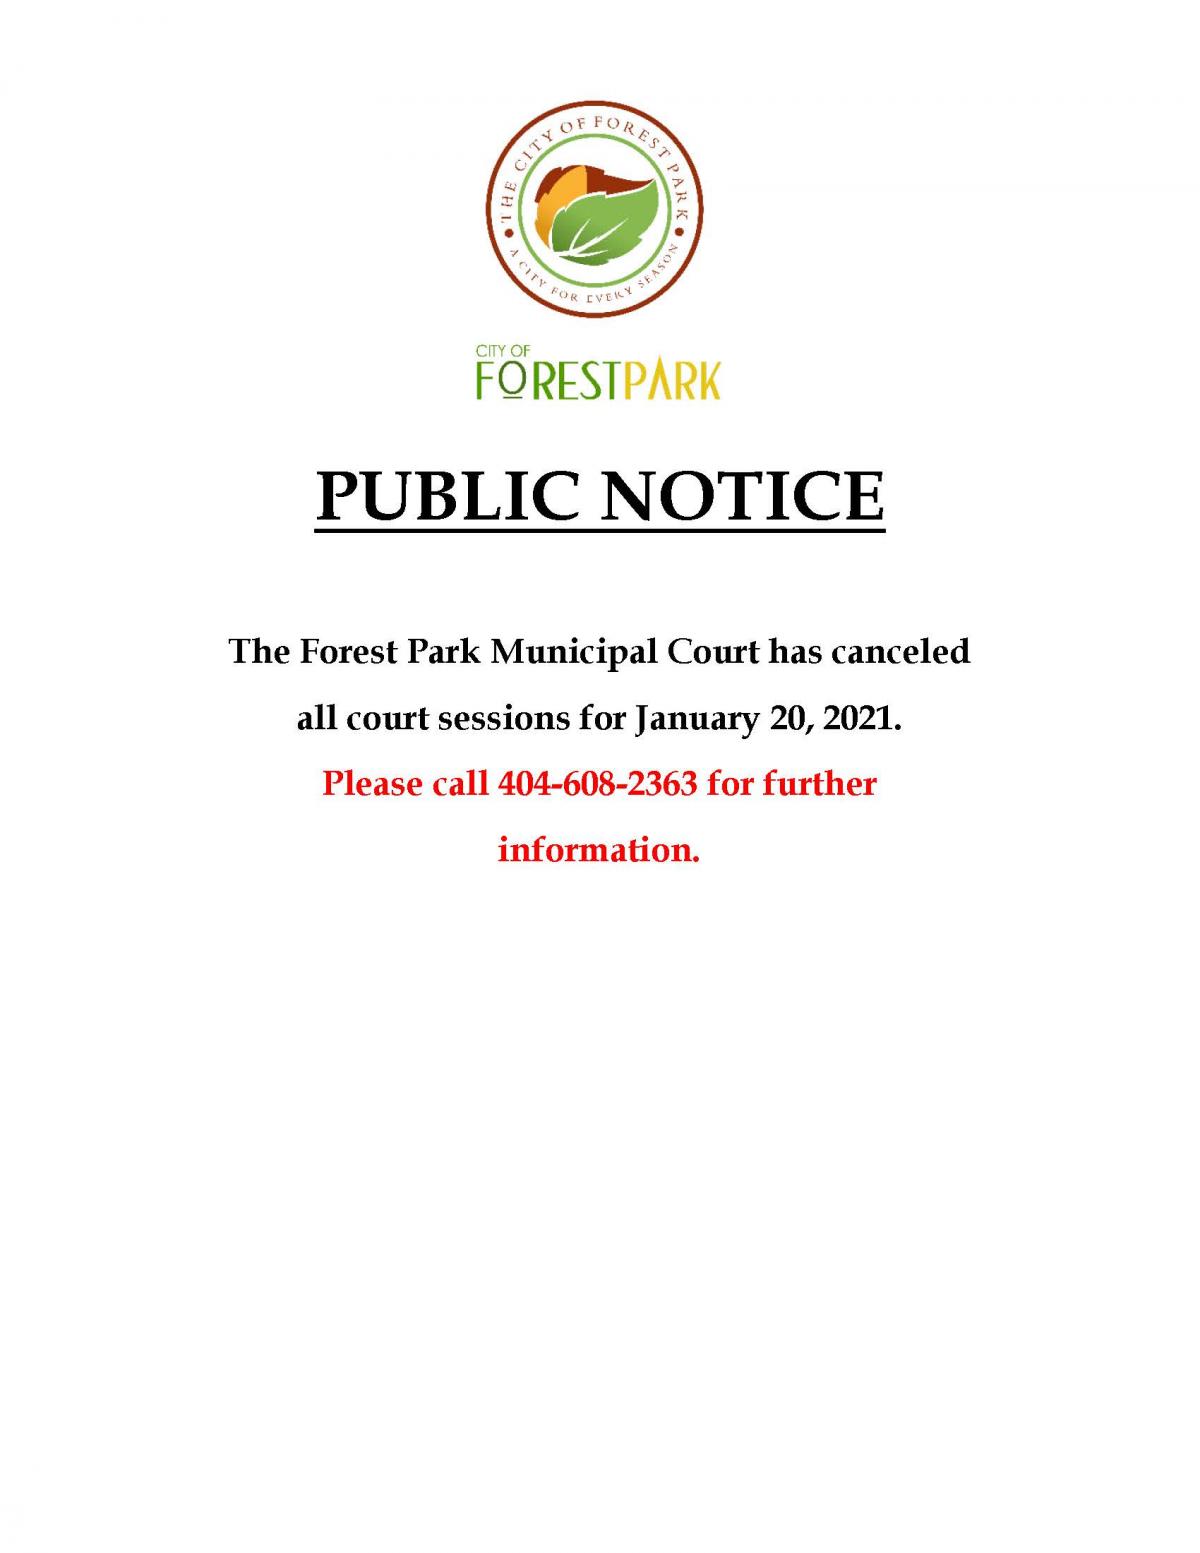 The Forest Park Municipal Court has cancelled all court sessions for January 20, 2021.  Please call 404-608-2363 for further inf